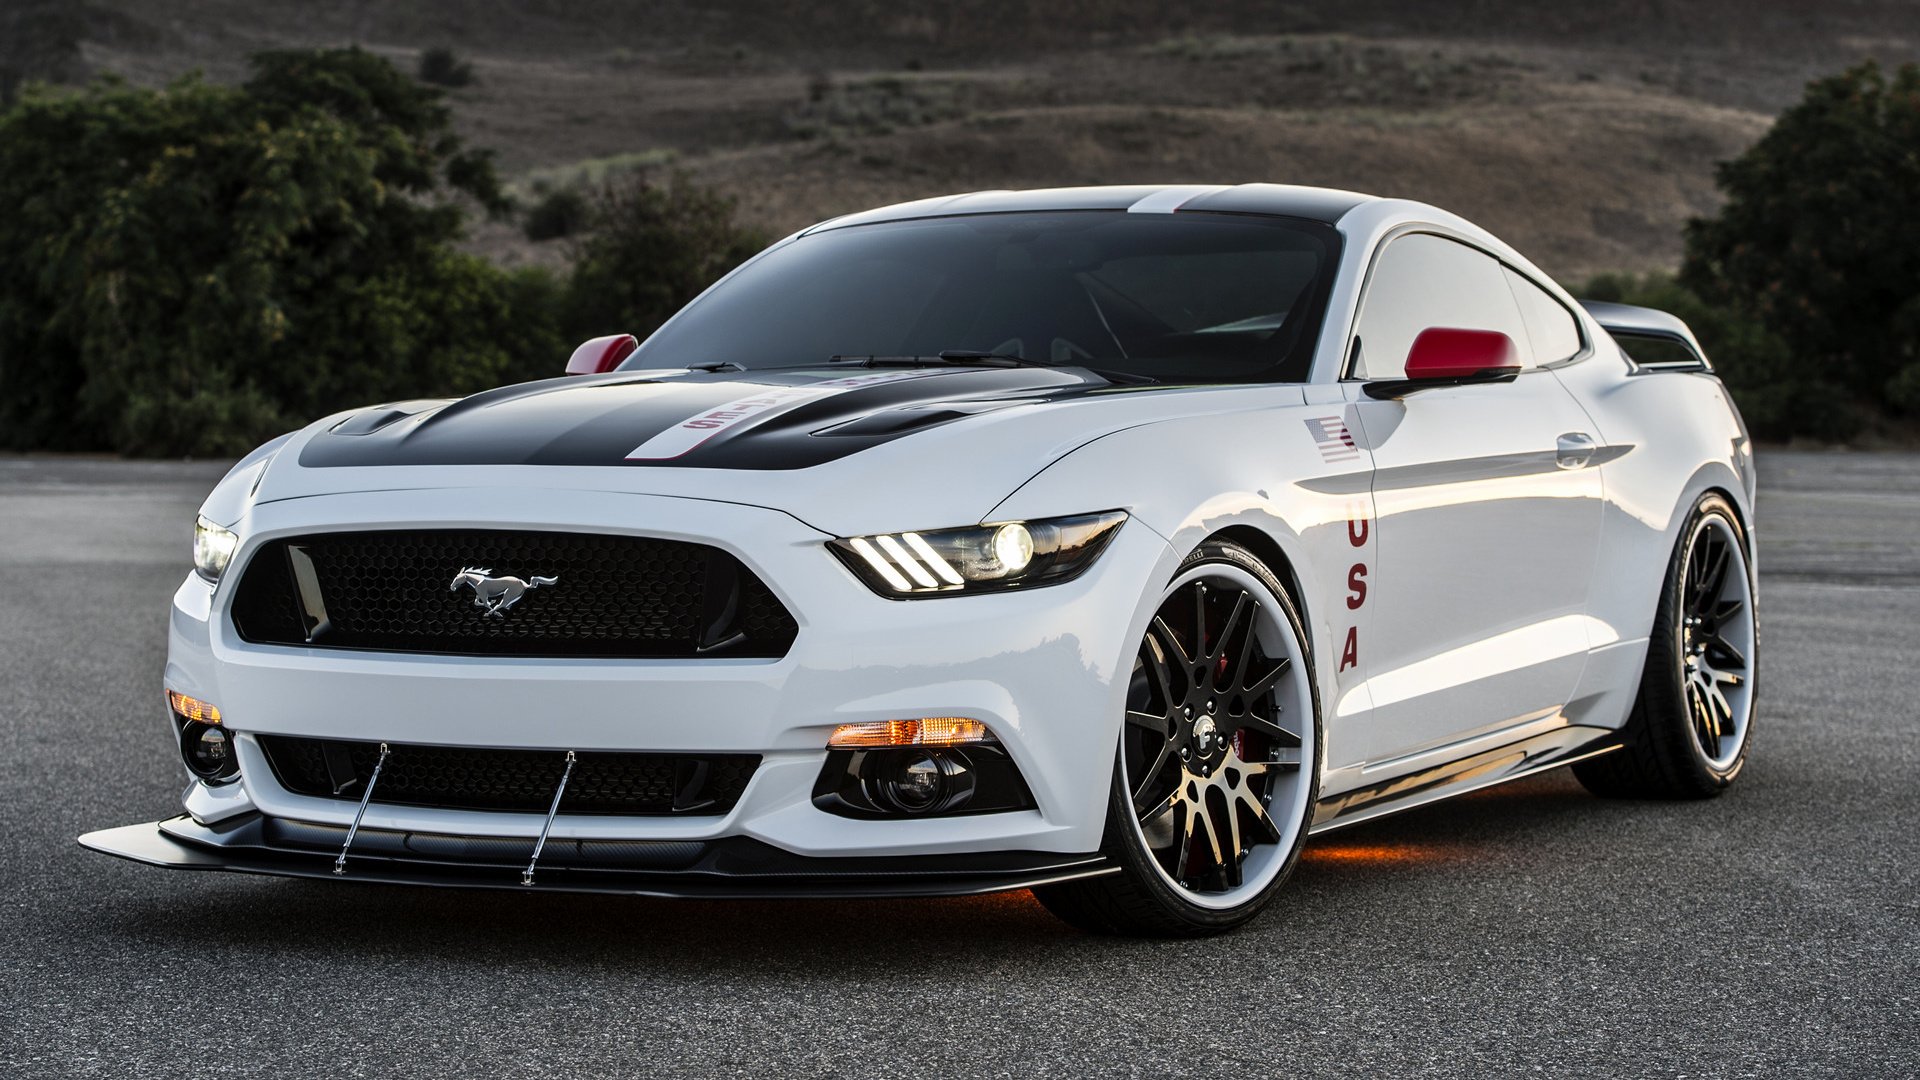 Mustang Of The Day: 2015 Ford Mustang GT Apollo Edition